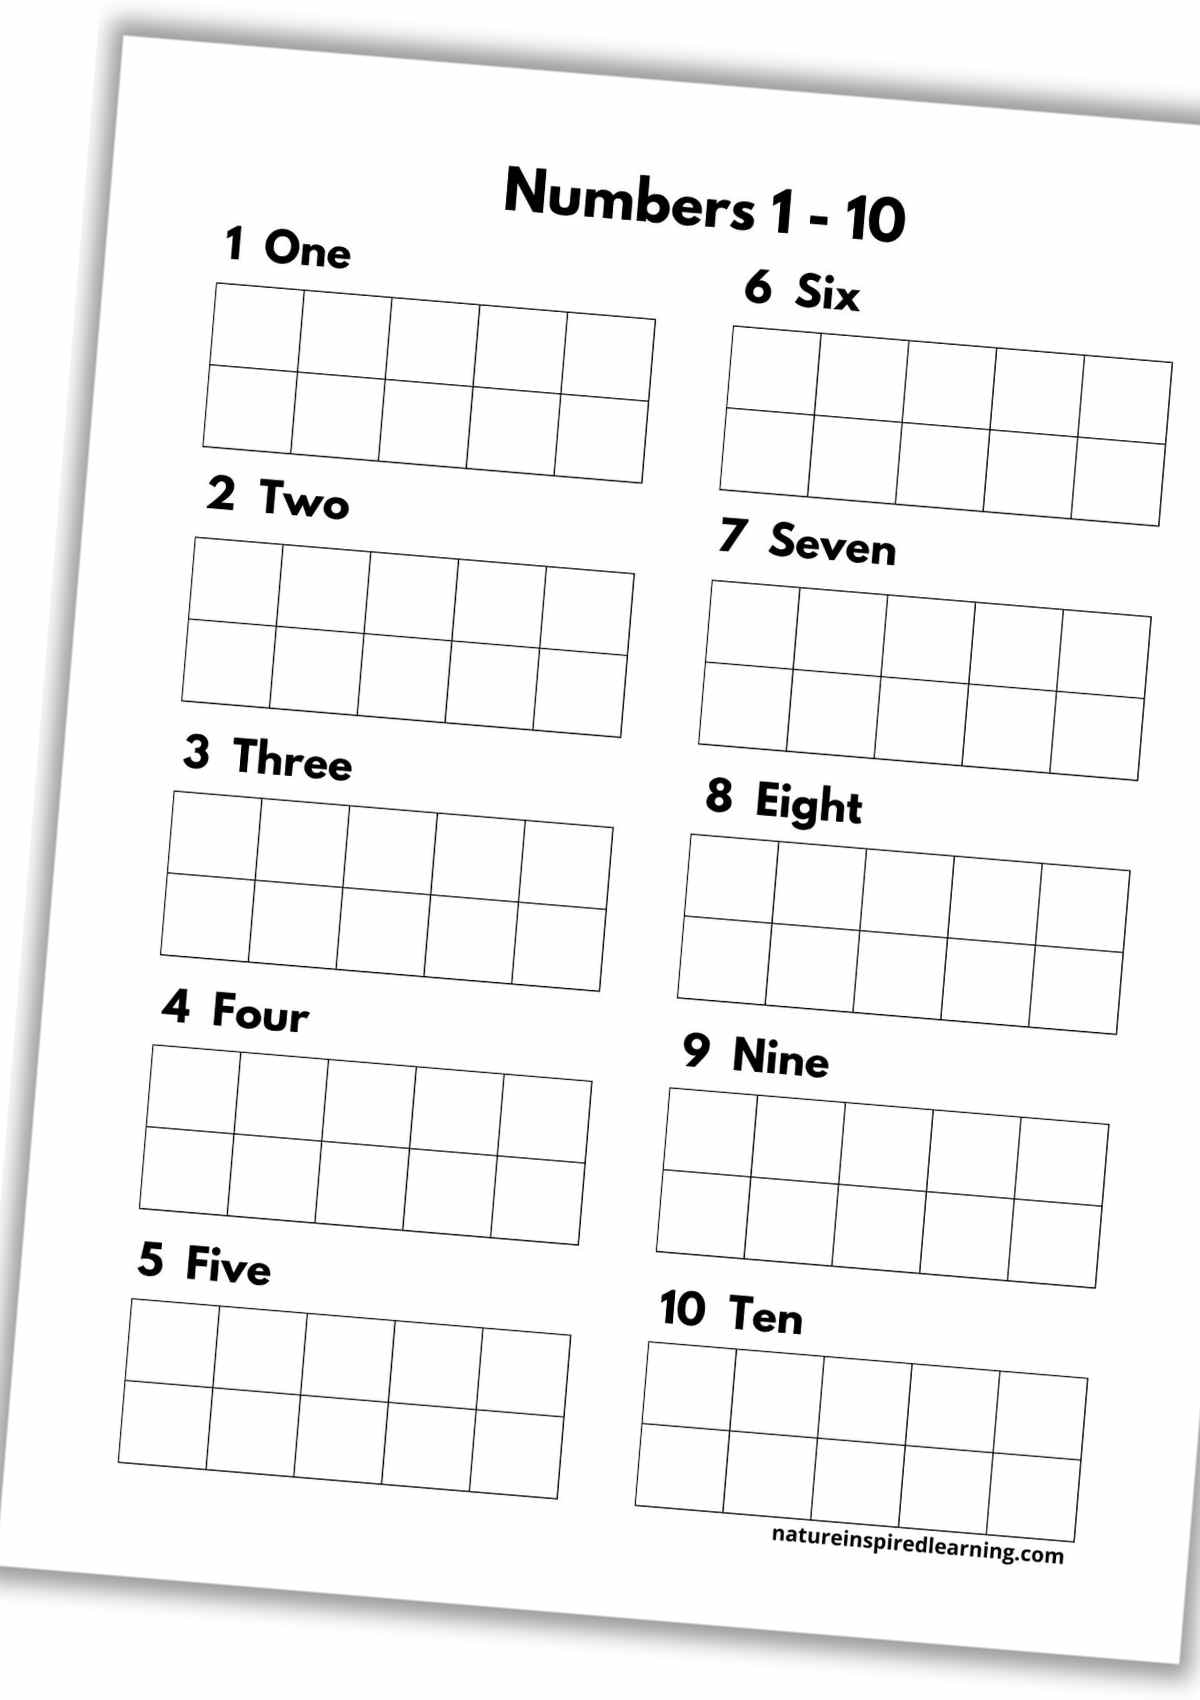 Printed ten frame sheet with ten frames one for each number 1-10 with labels above each frame